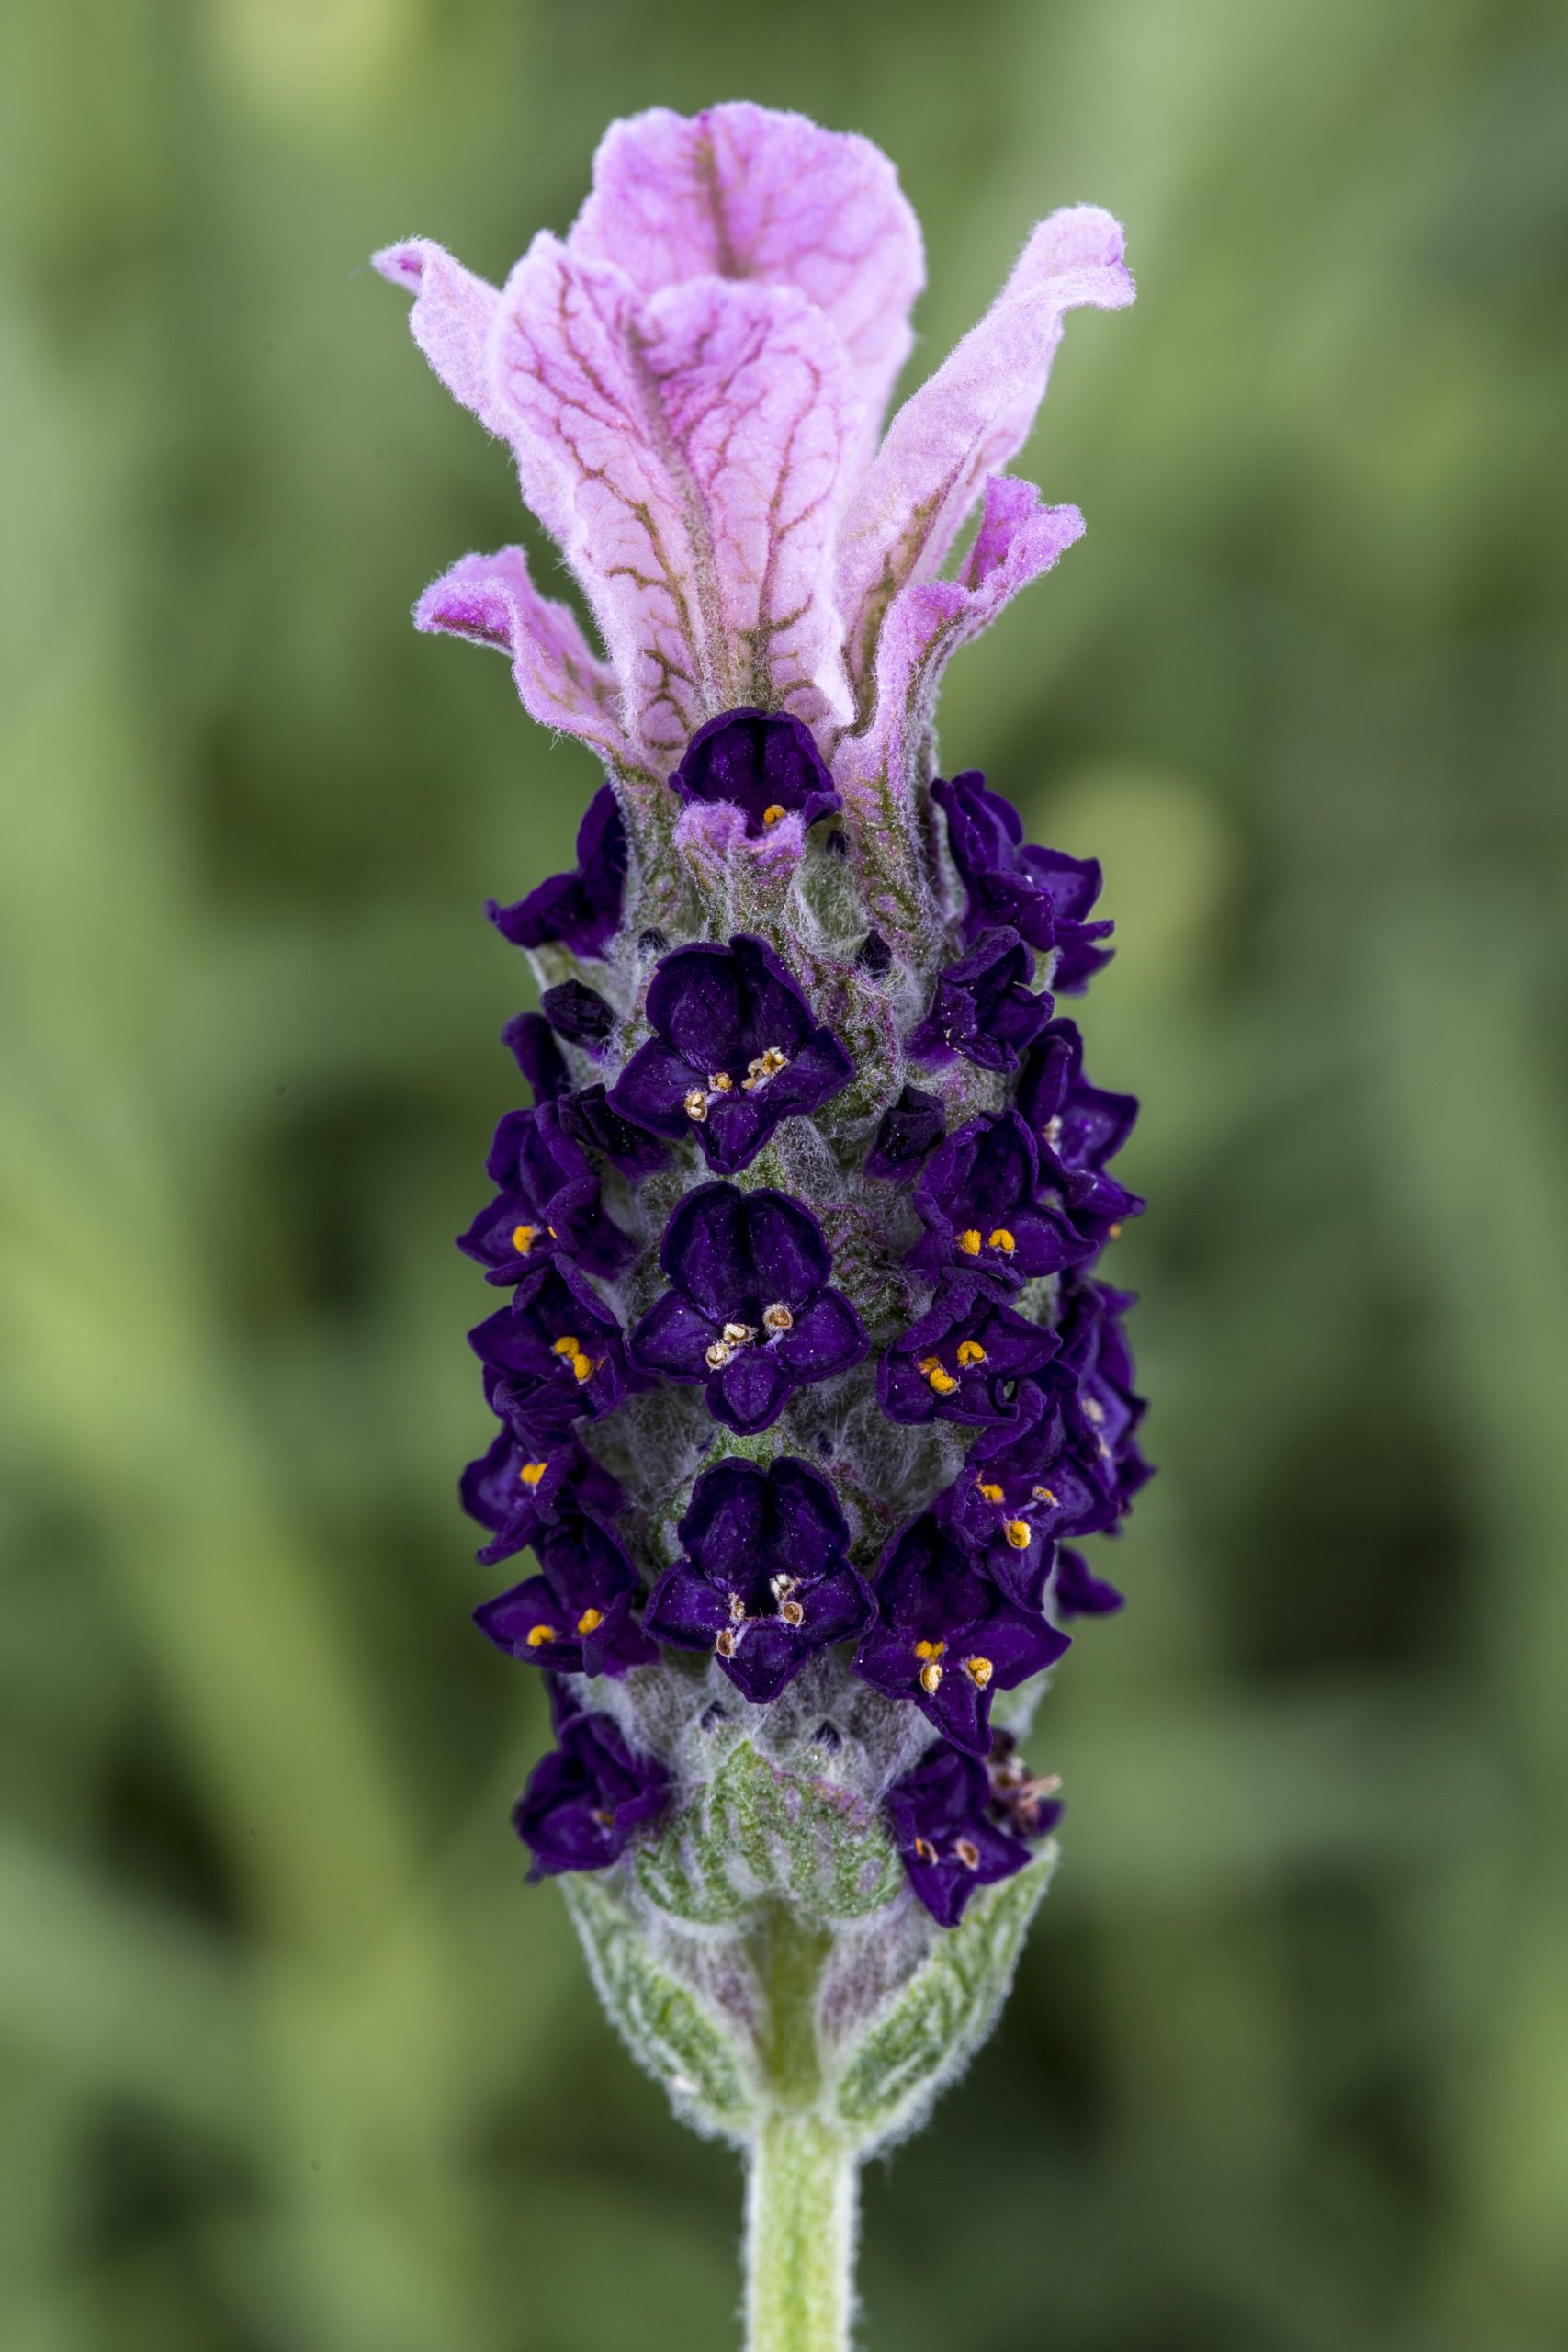 On this Lavender Castilliano flower it’s easy to see the corolla (which is tubular) and what we often refer to as the petals and the calix. The two parts are different colors as seen here, where the corolla is purple and the calix is pink.